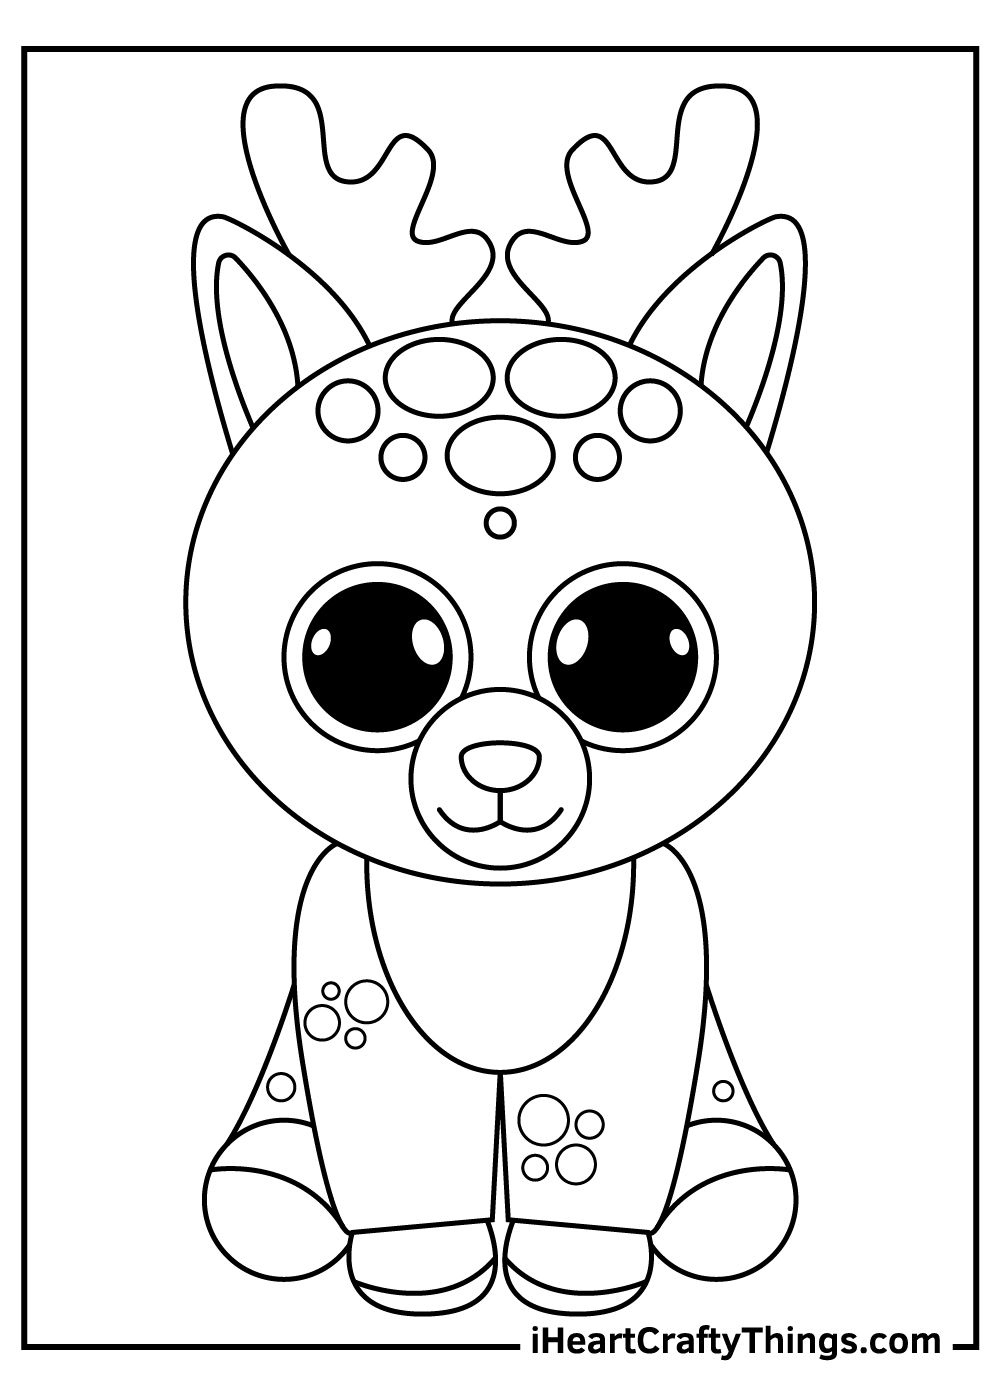 Beanie Boos Coloring Pages | Coloring Pages, Animal Coloring Pages intended for Free Printable Beanie Boo Coloring Pages